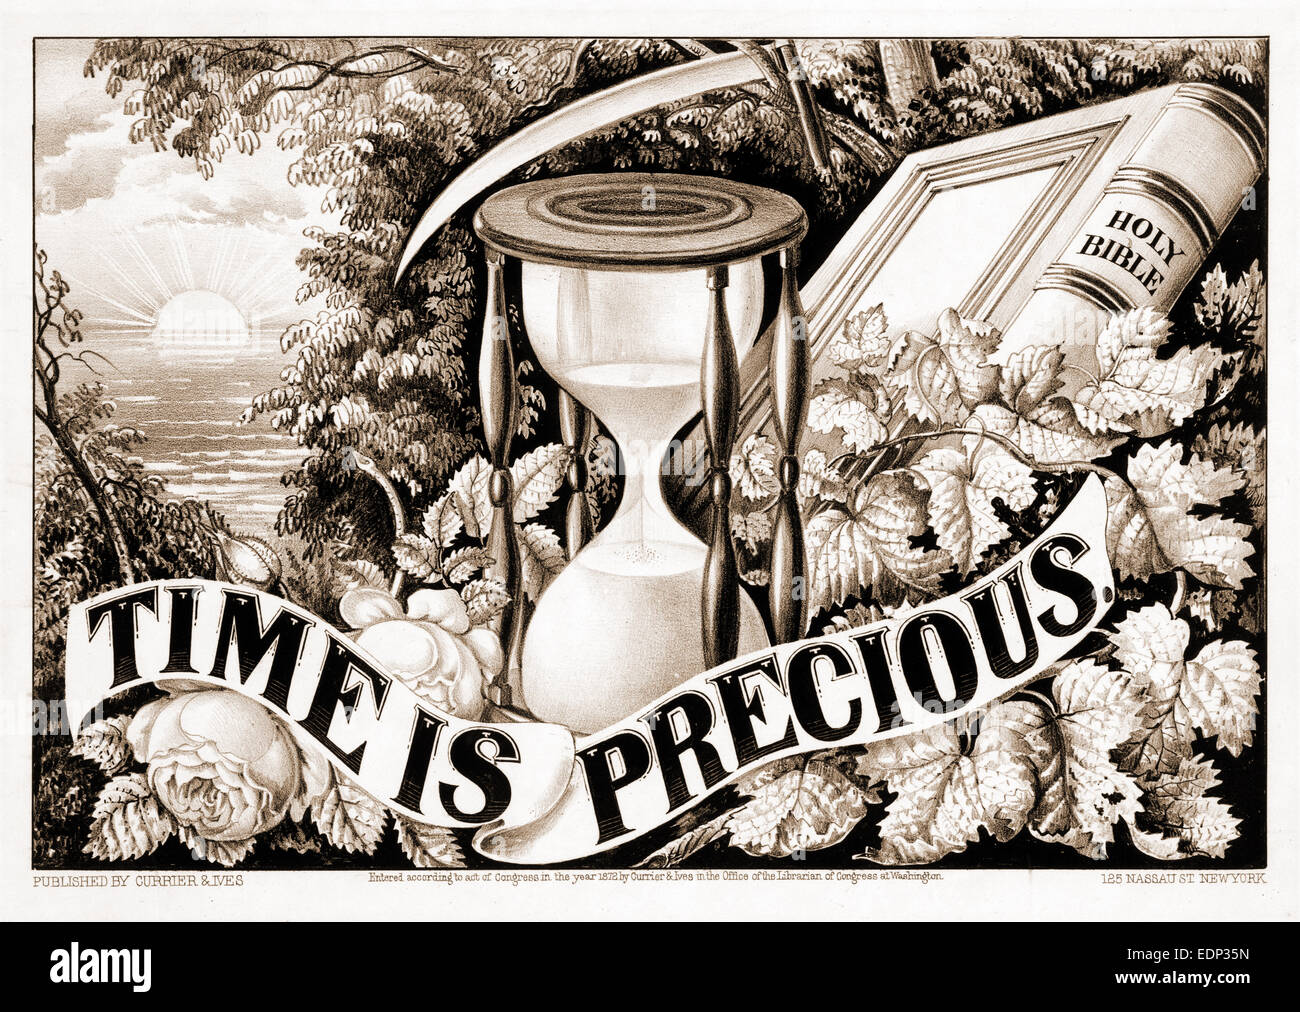 Time is precious; Currier & Ives.,; New York : Published by Currier & Ives, c1872.; 1 print : lithograph ; 34.3 x 44.8 cm. Stock Photo